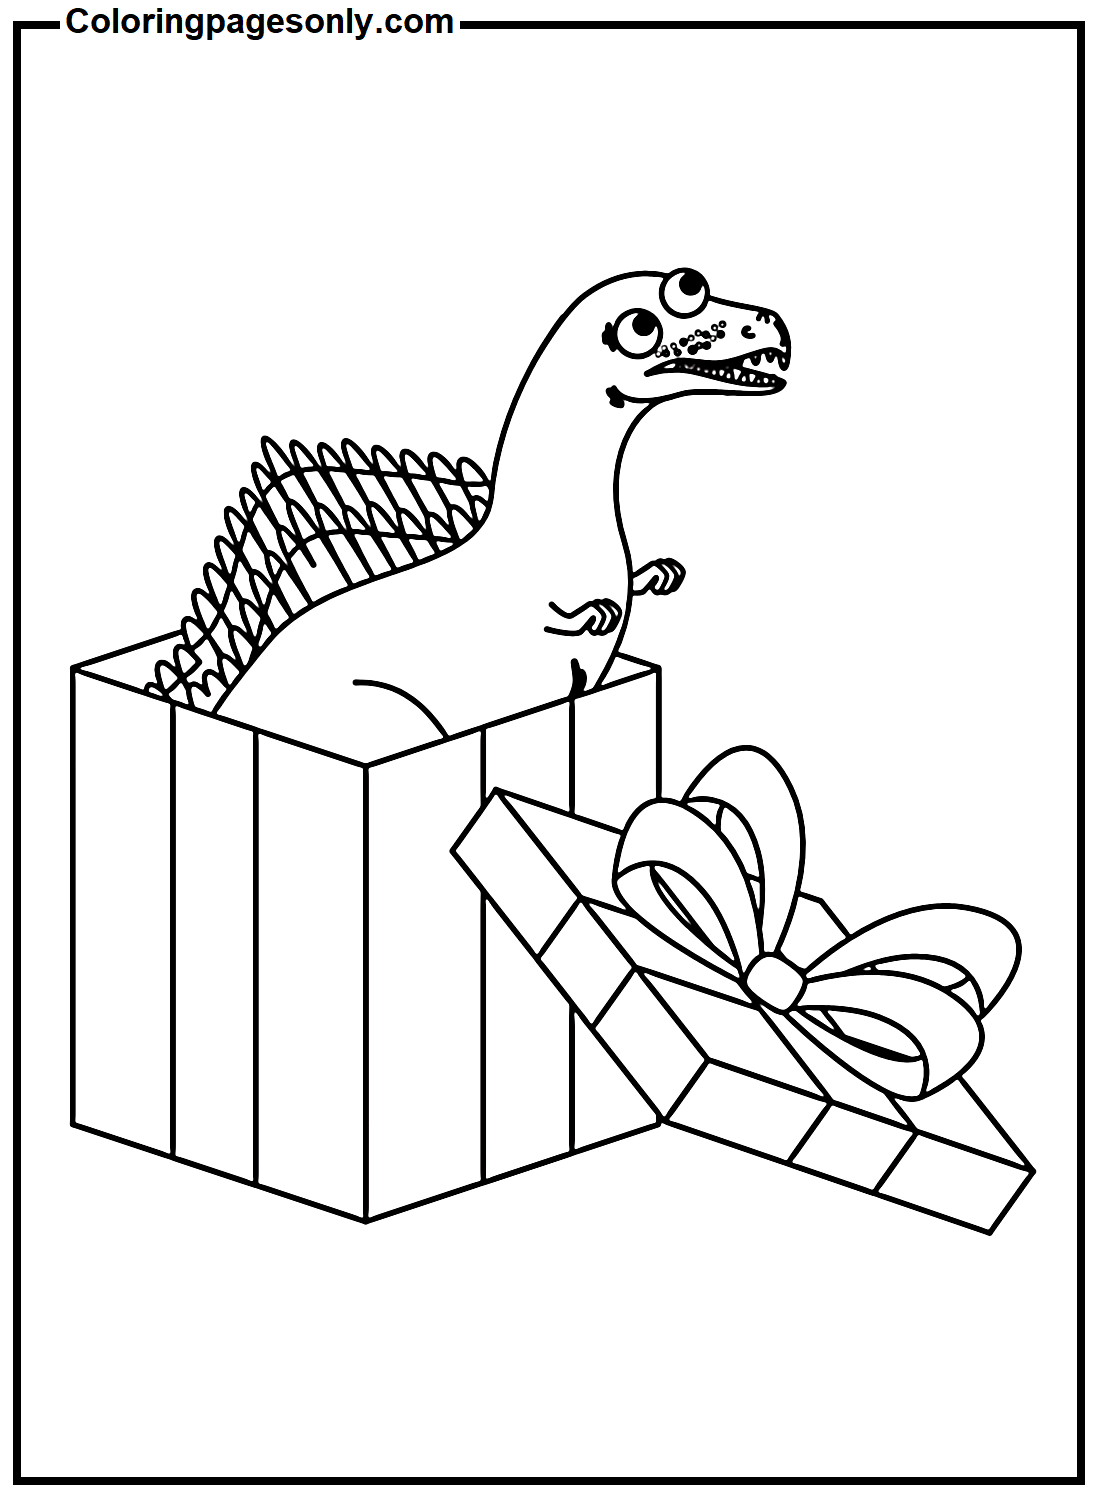 Spinosaurus In Gift Box Coloring Pages